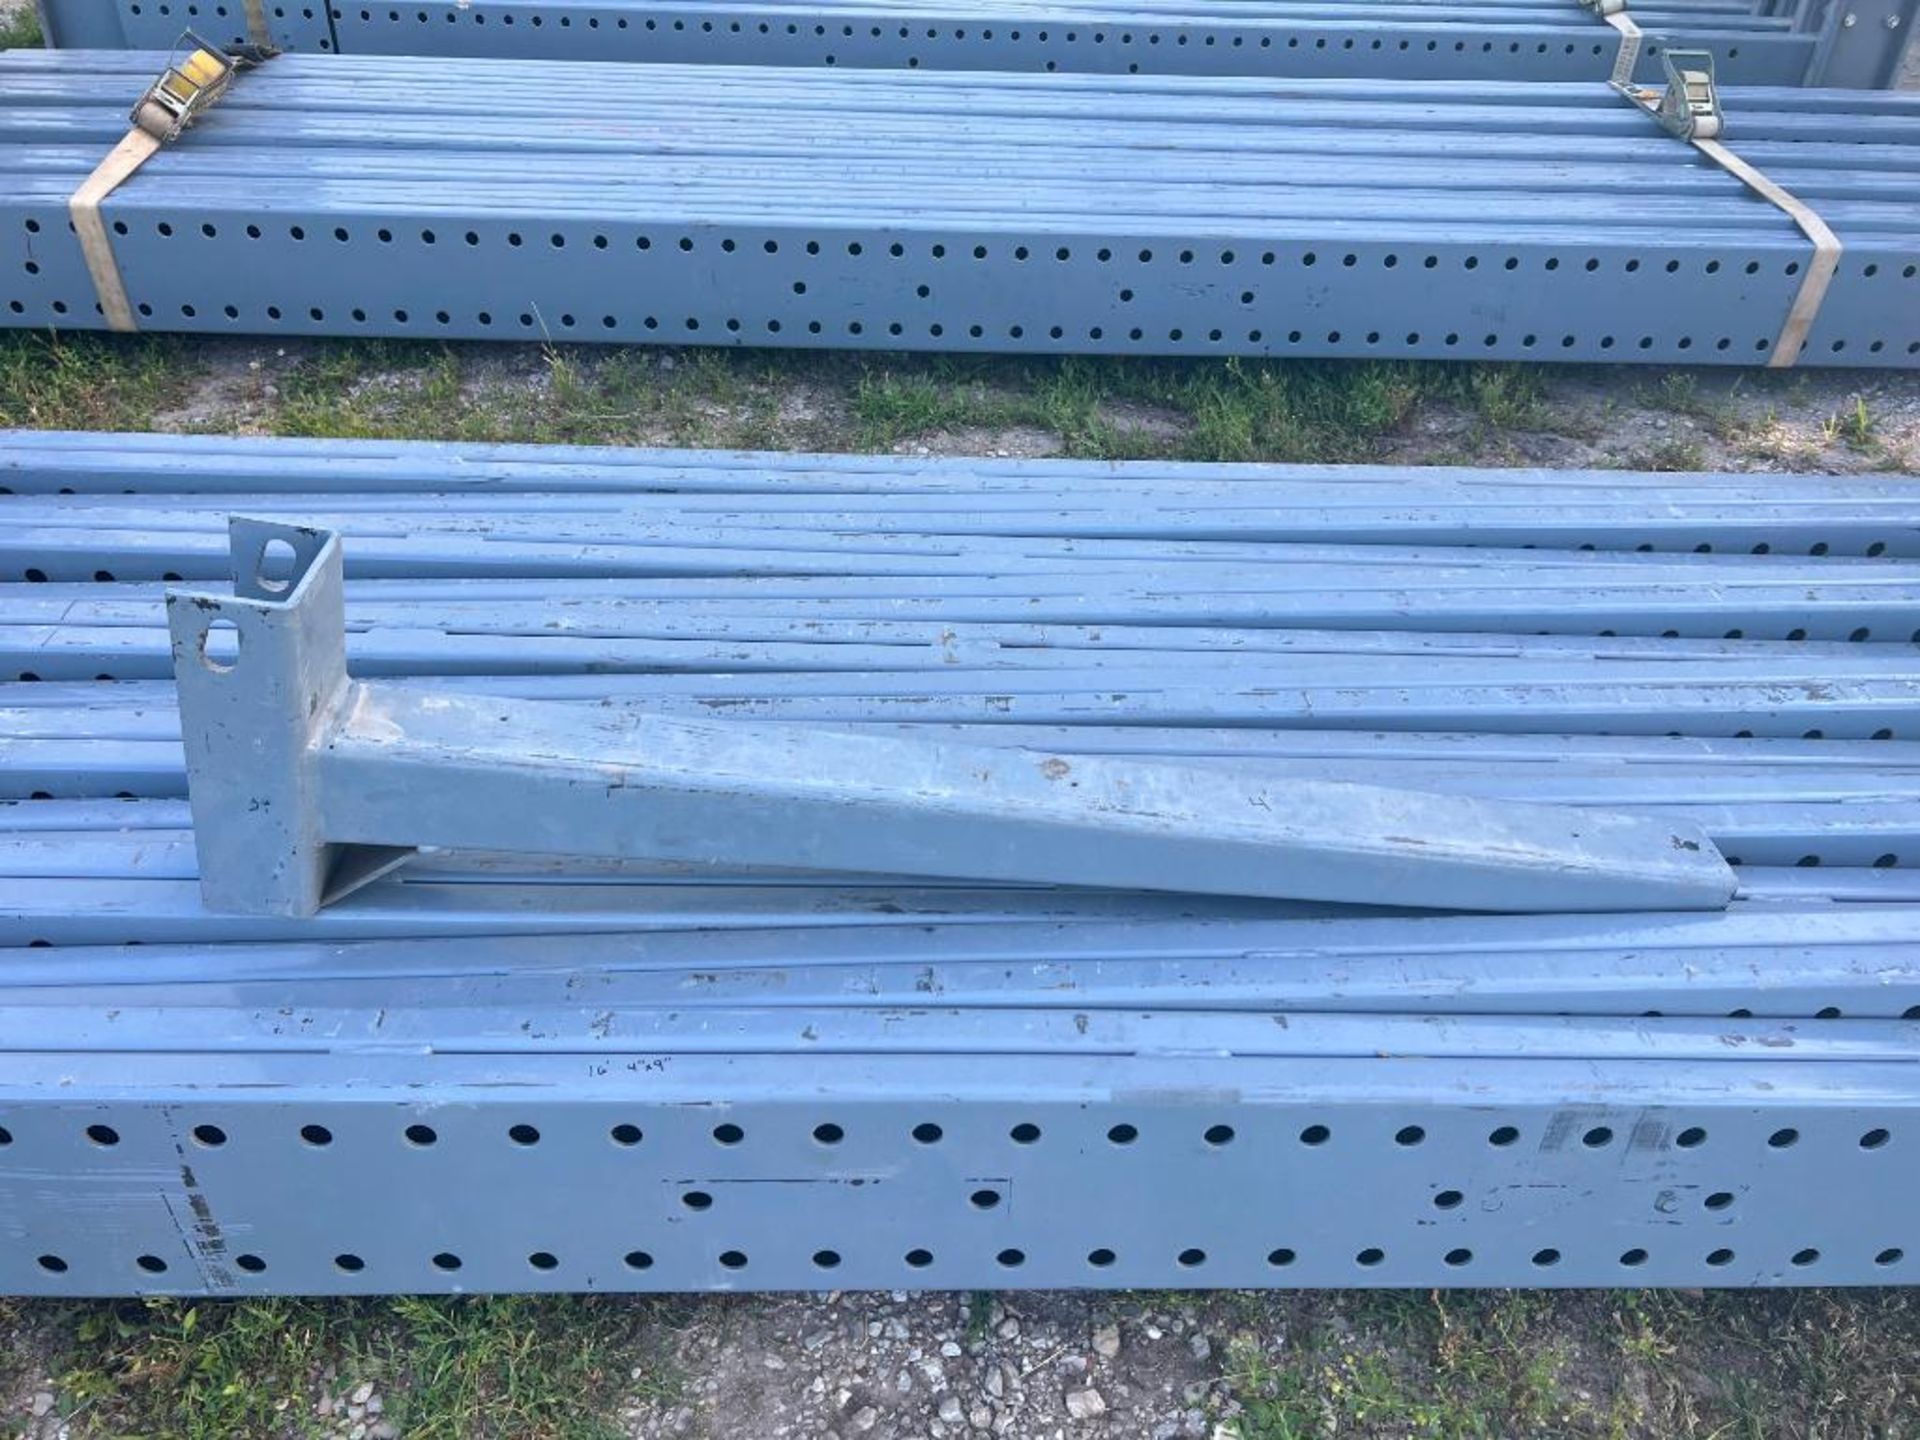 Heavy Duty Cantilever Racking - (2) 16' Uprights with 5'1" Legs, (6) 4' Arms, (2) 60" Brace Set/Hard - Image 11 of 16